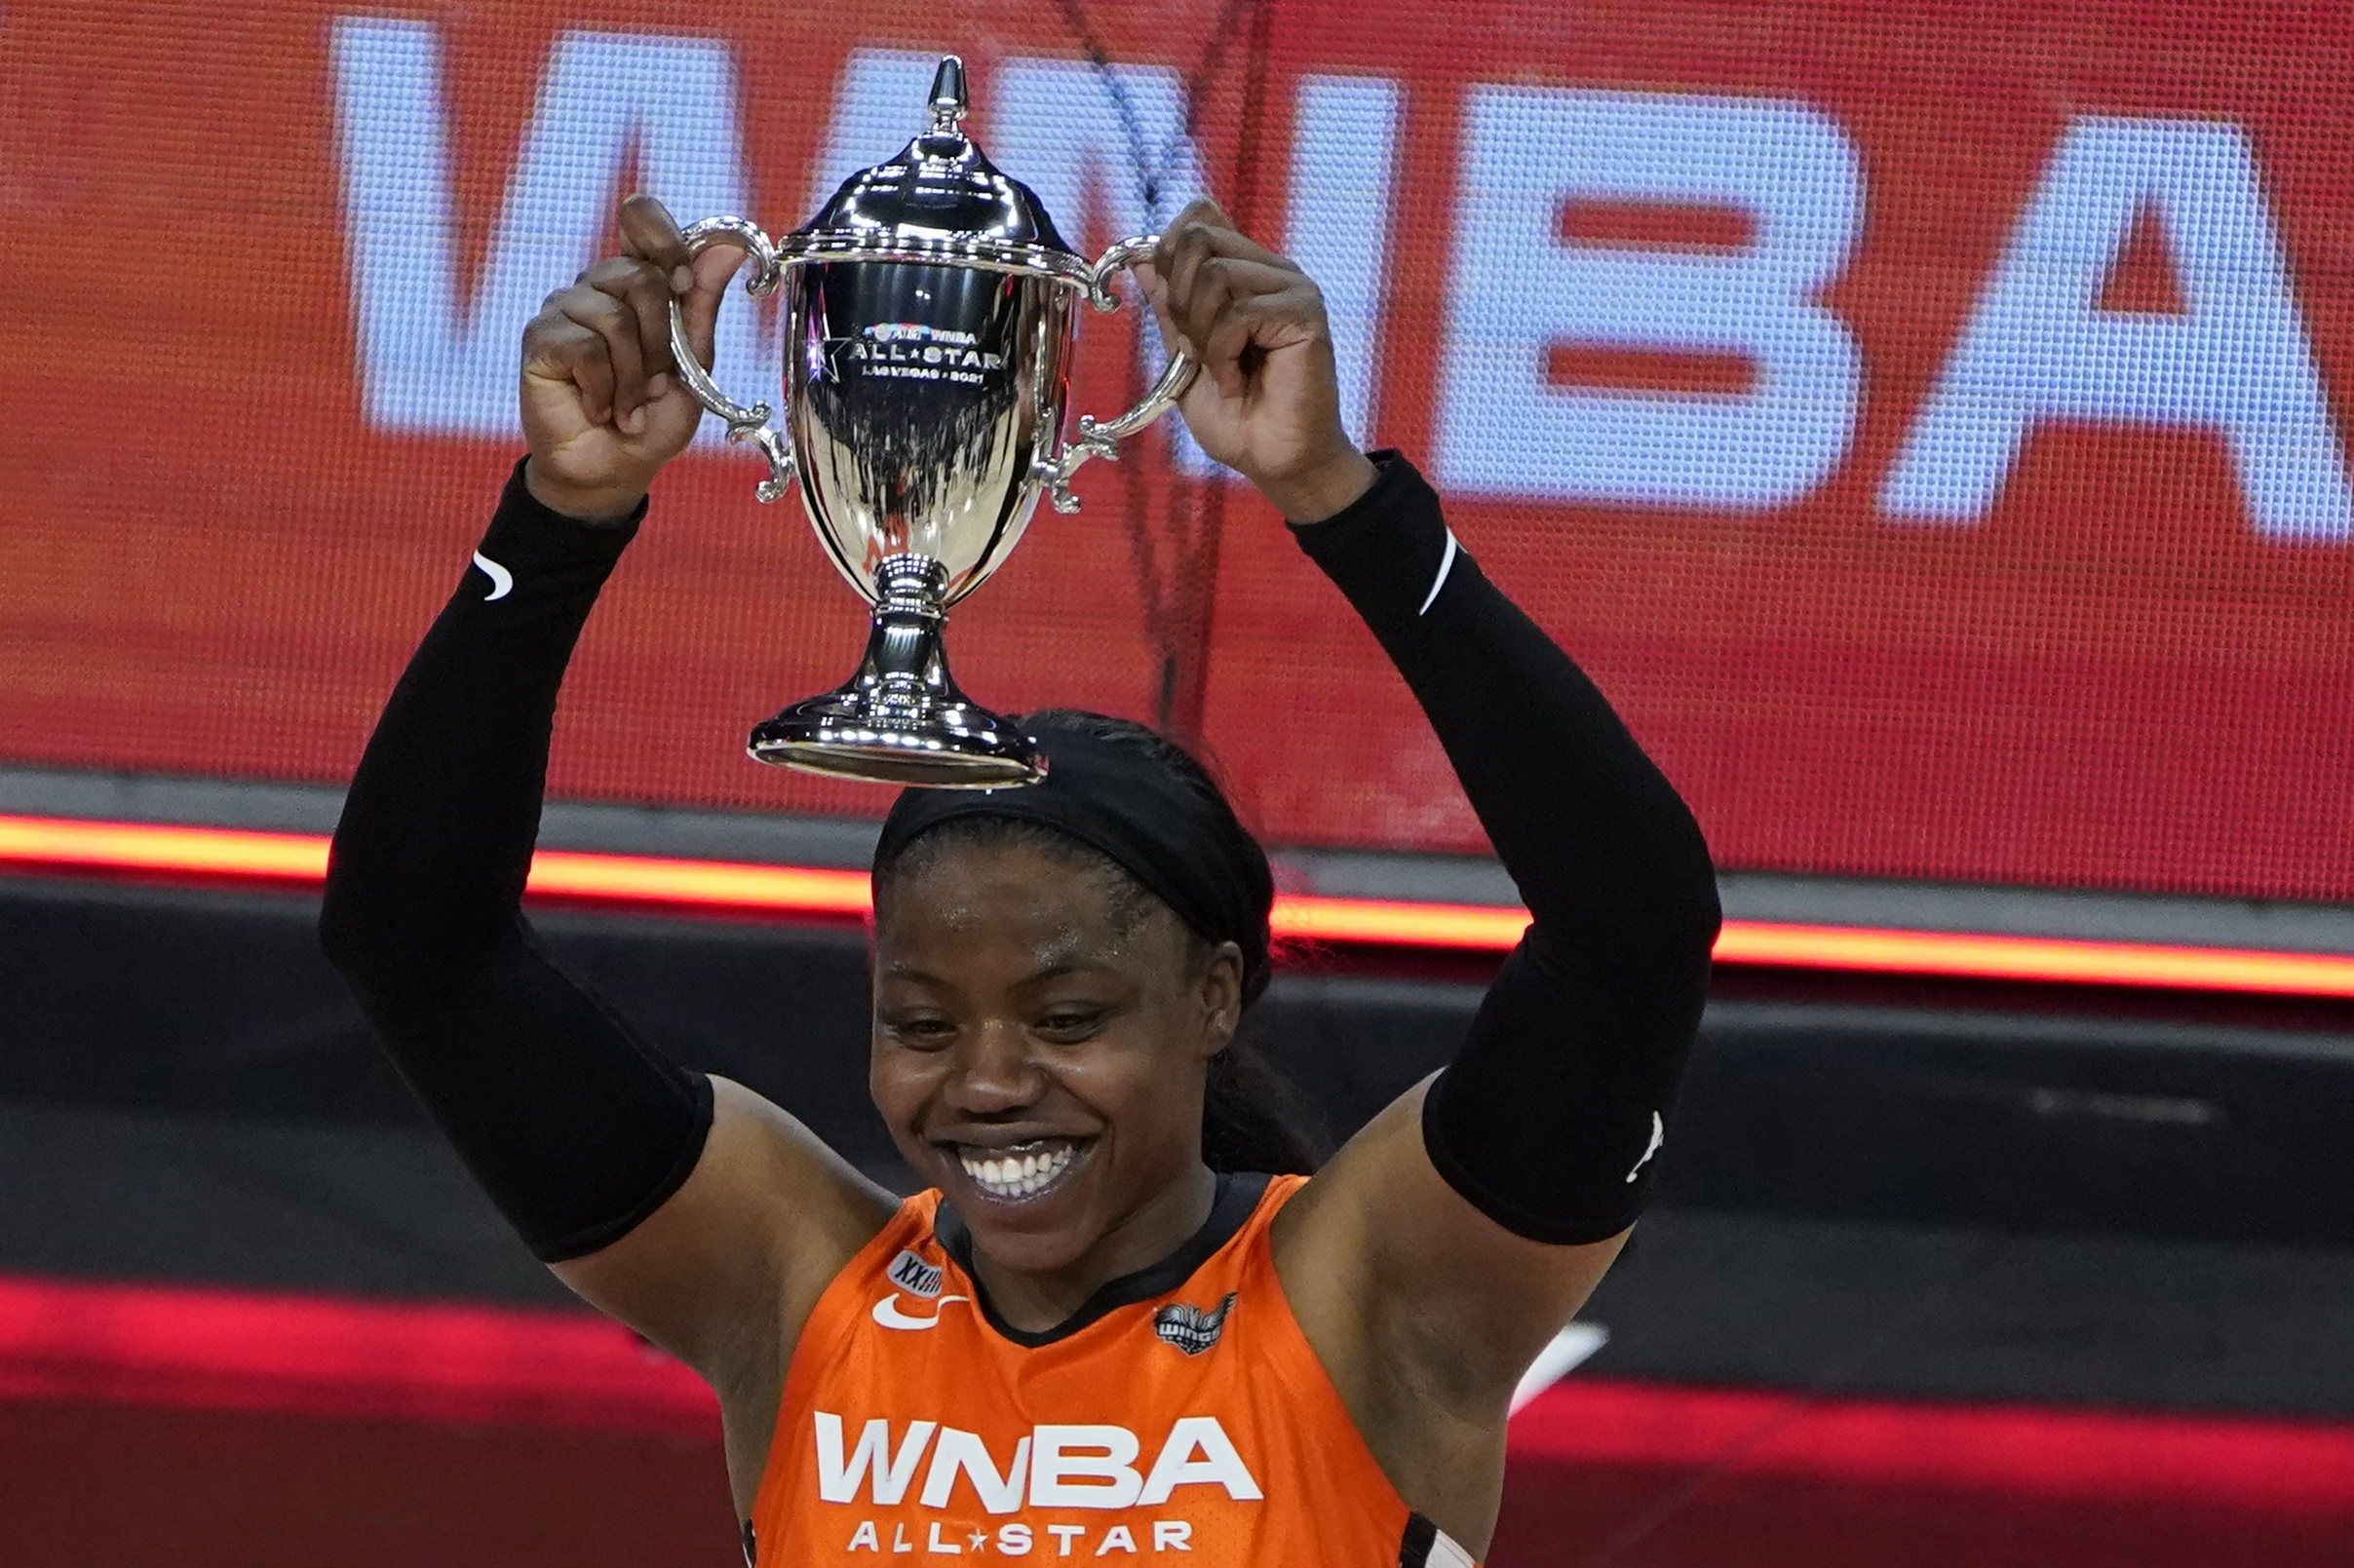 Arike Ogunbowale of Team WNBA holds up the MVP trophy after the